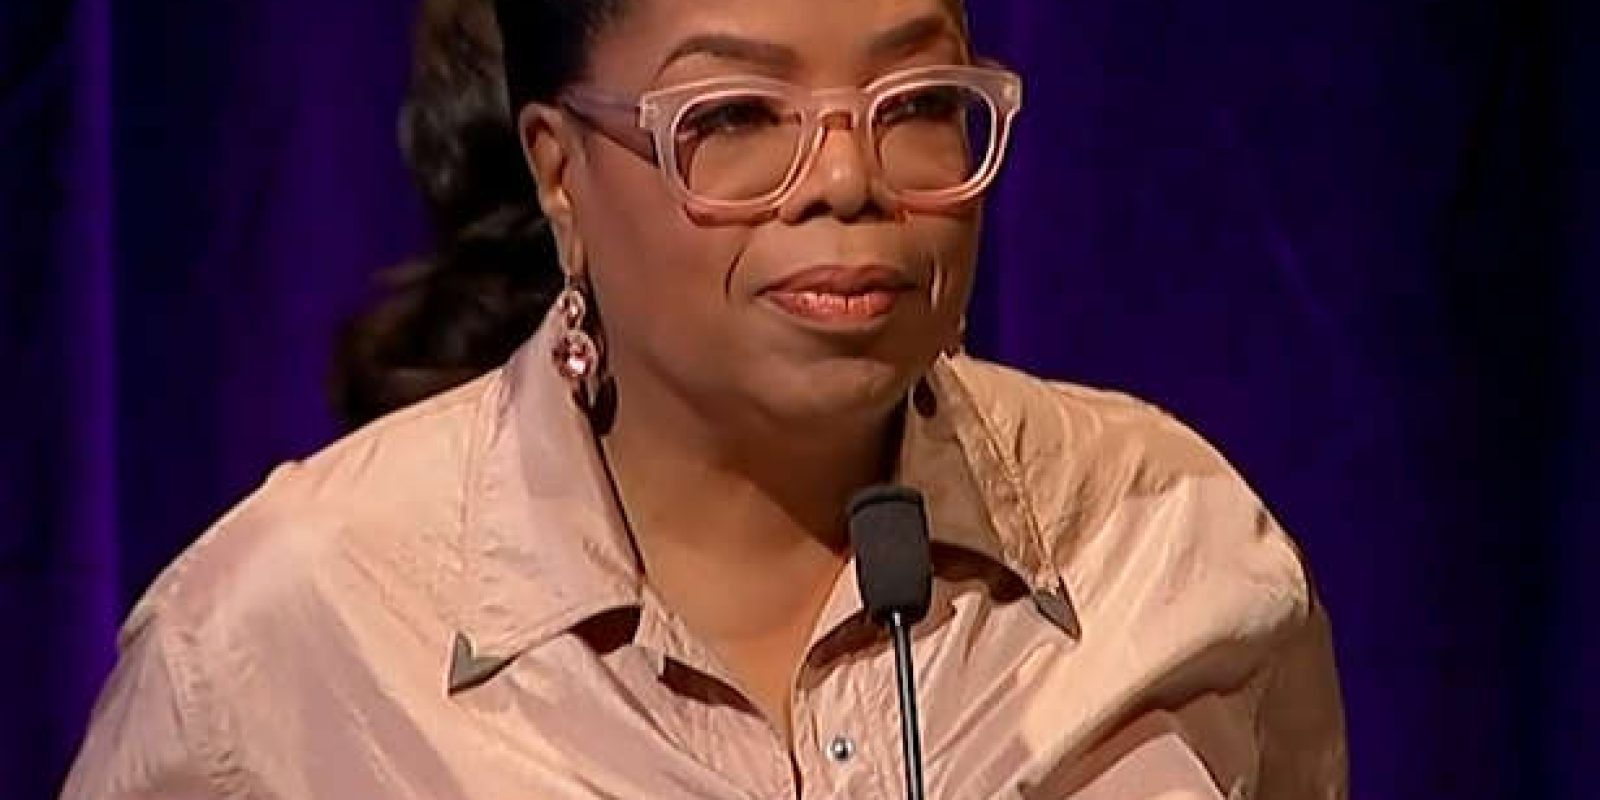 Watching Oprah: The Oprah Winfrey Show and American Culture